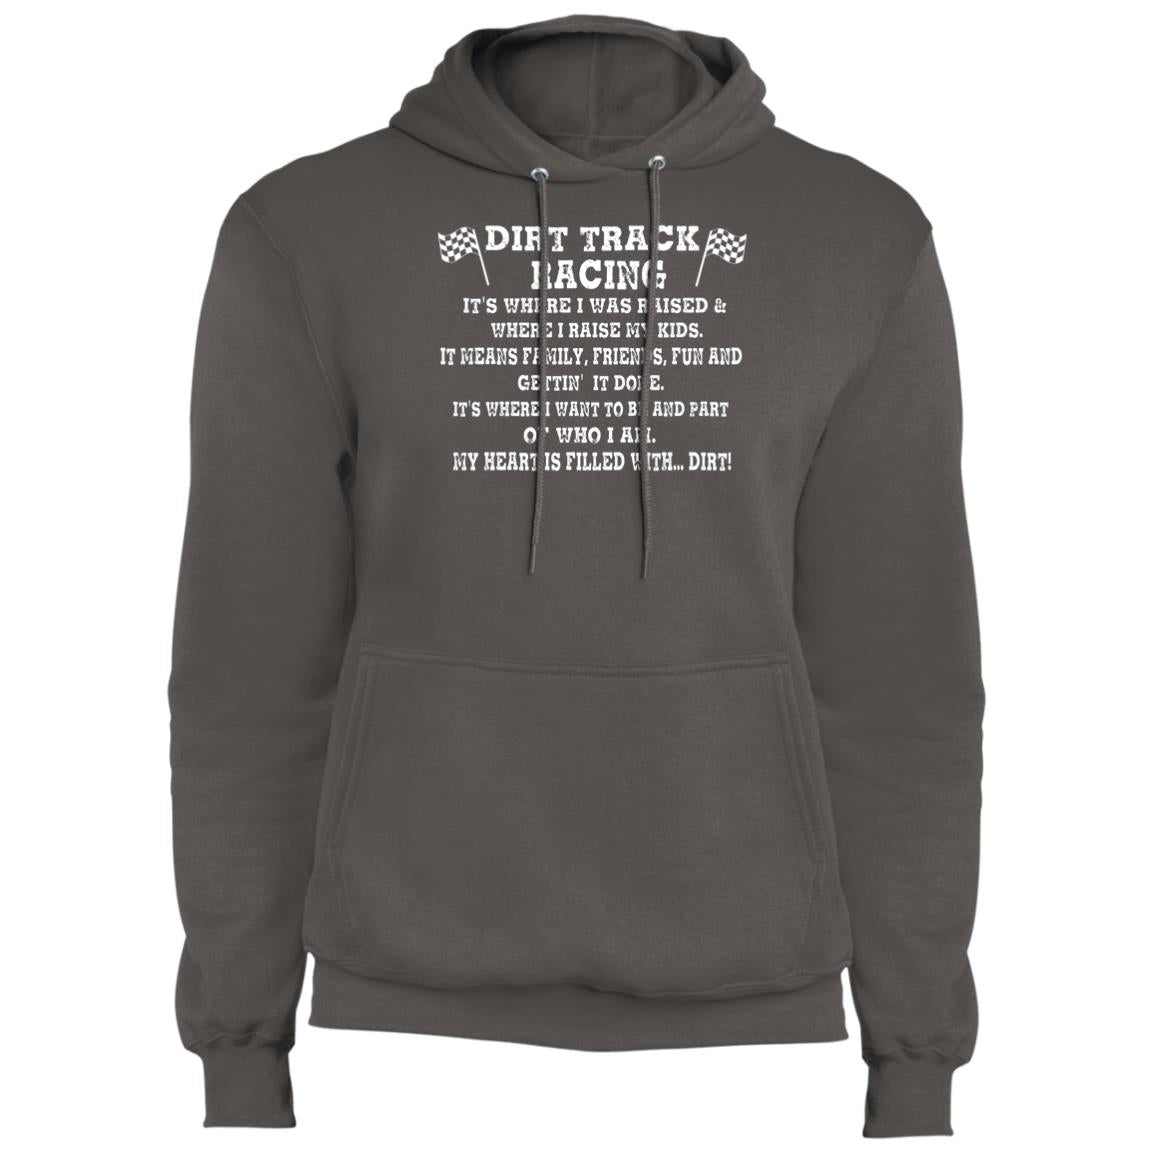 Dirt Track Racing It's Where I Was Raised Core Fleece Pullover Hoodie